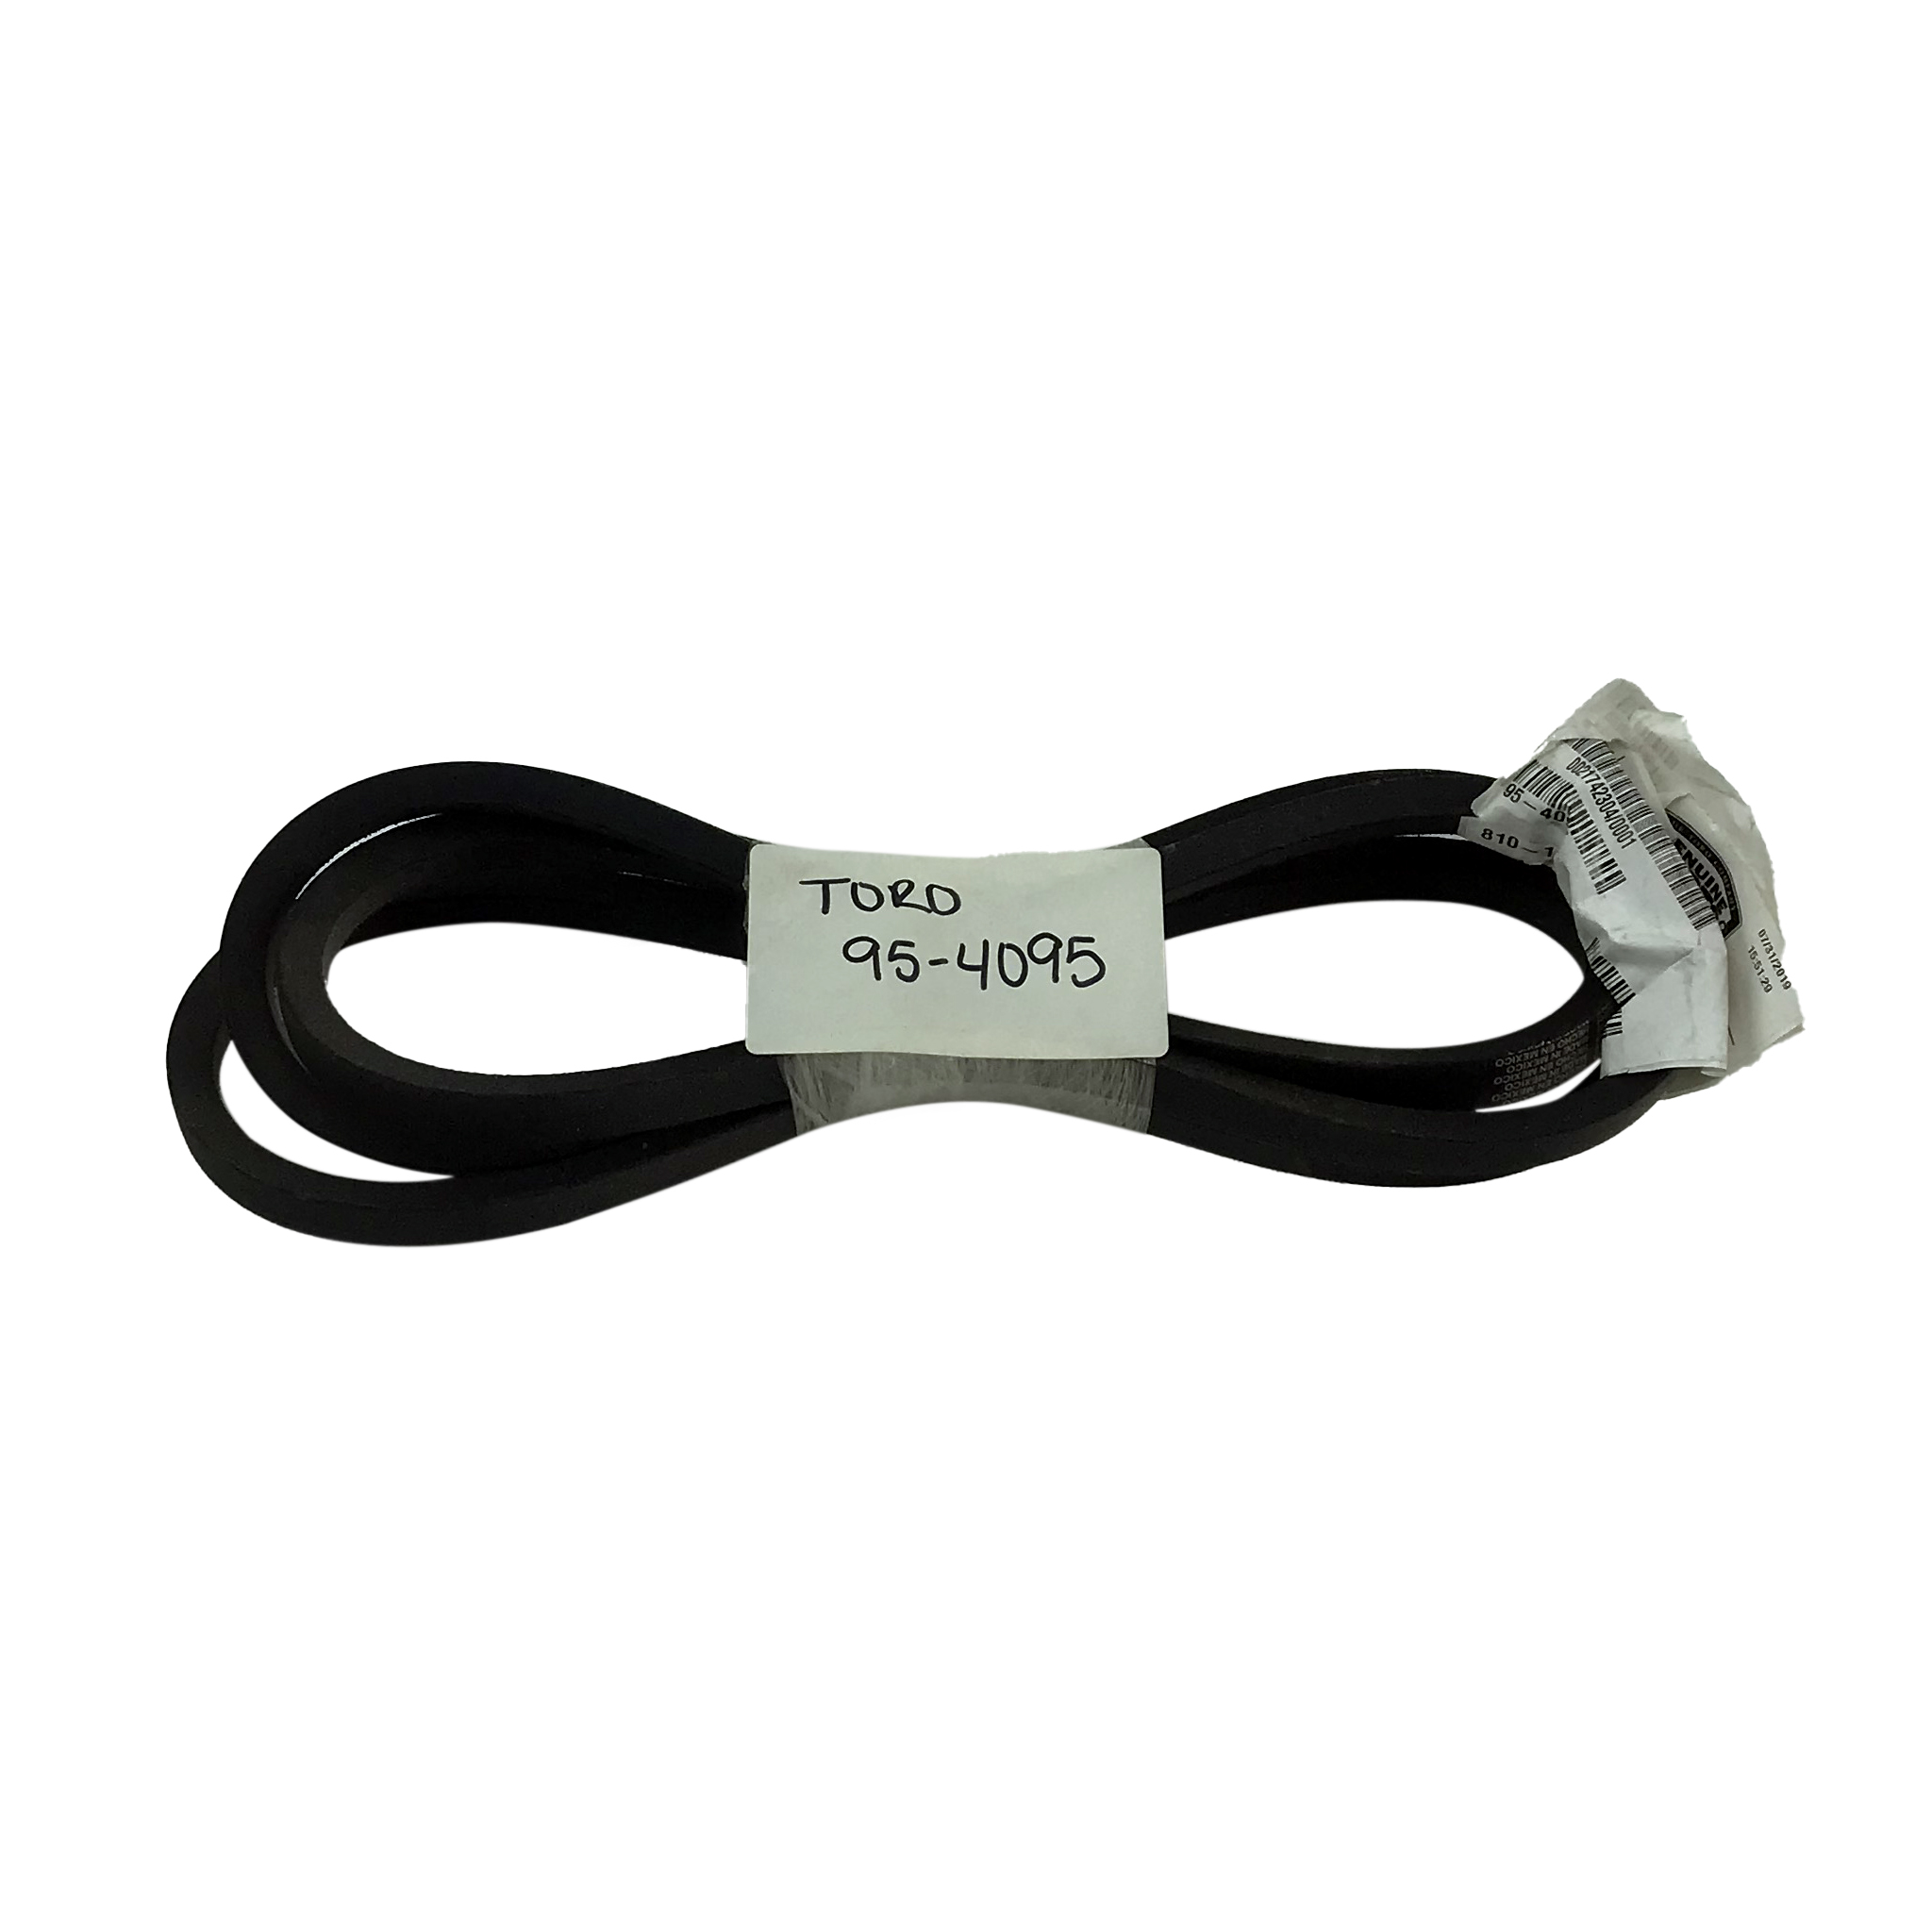 TORO 95-4095 Replacement Belt Made With Kevlar 